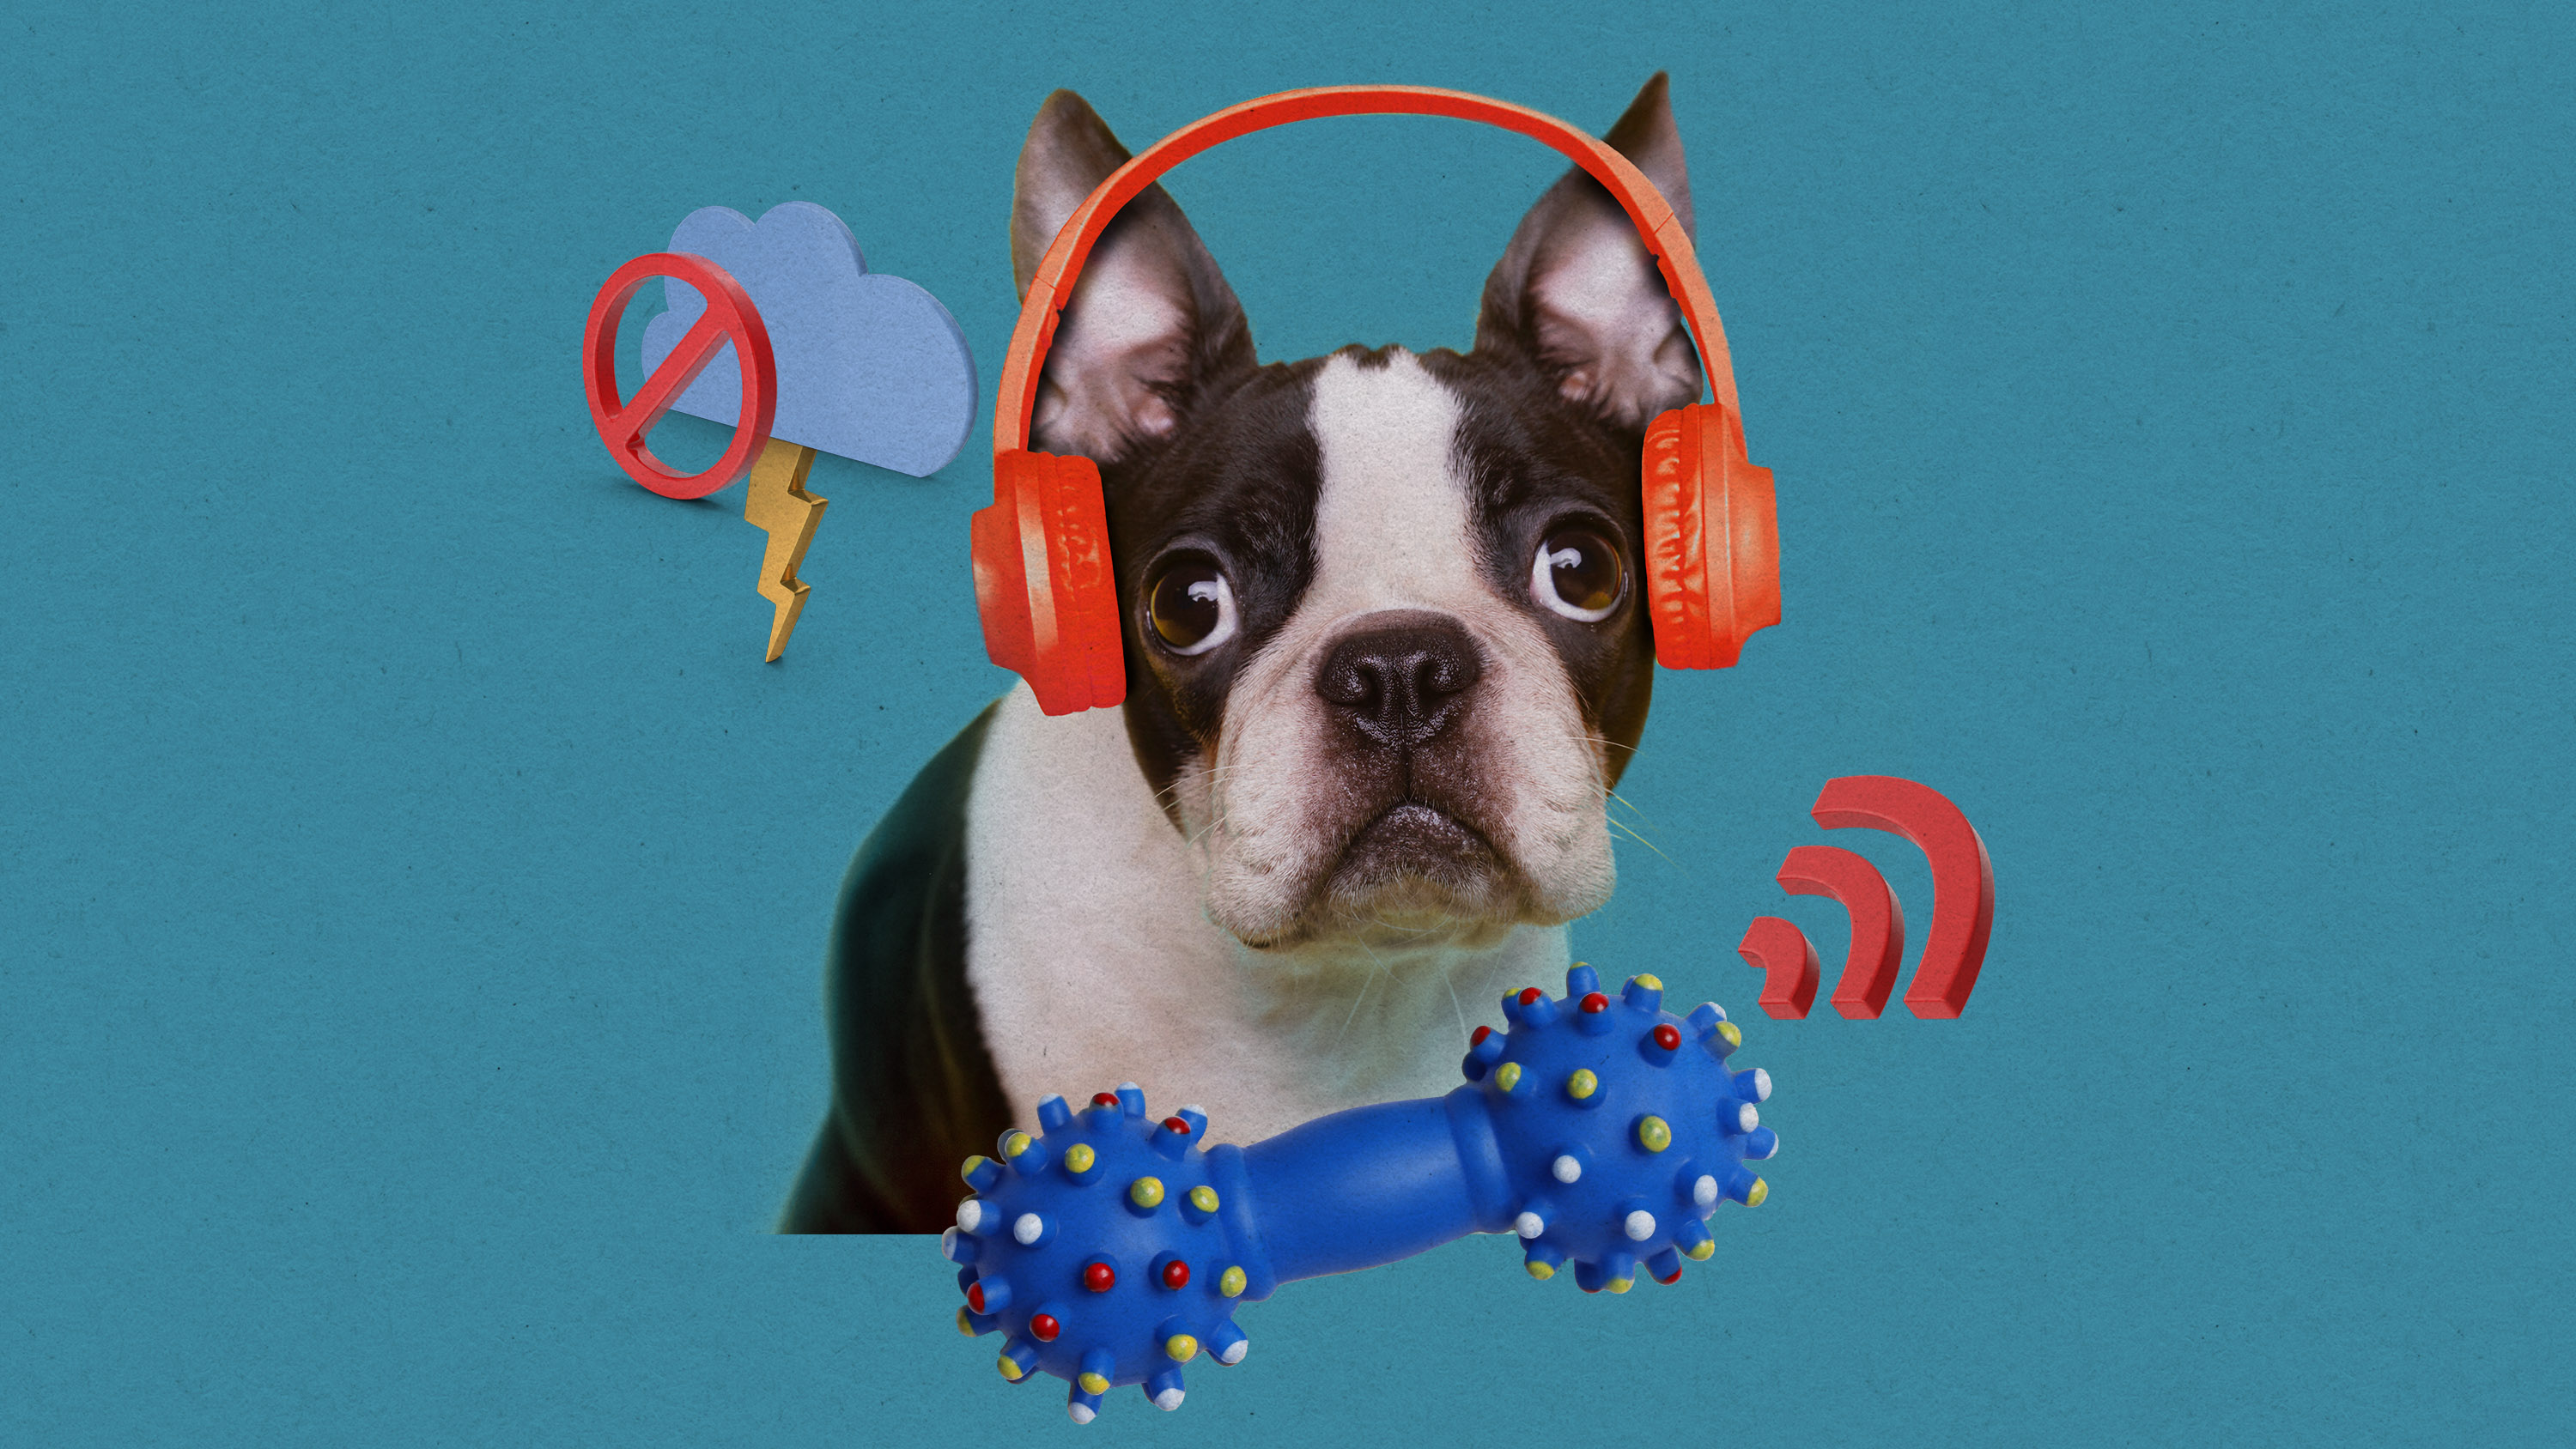 a boston terrier wearing red headphones can hear his squeak toy but not a cancelled-out storm